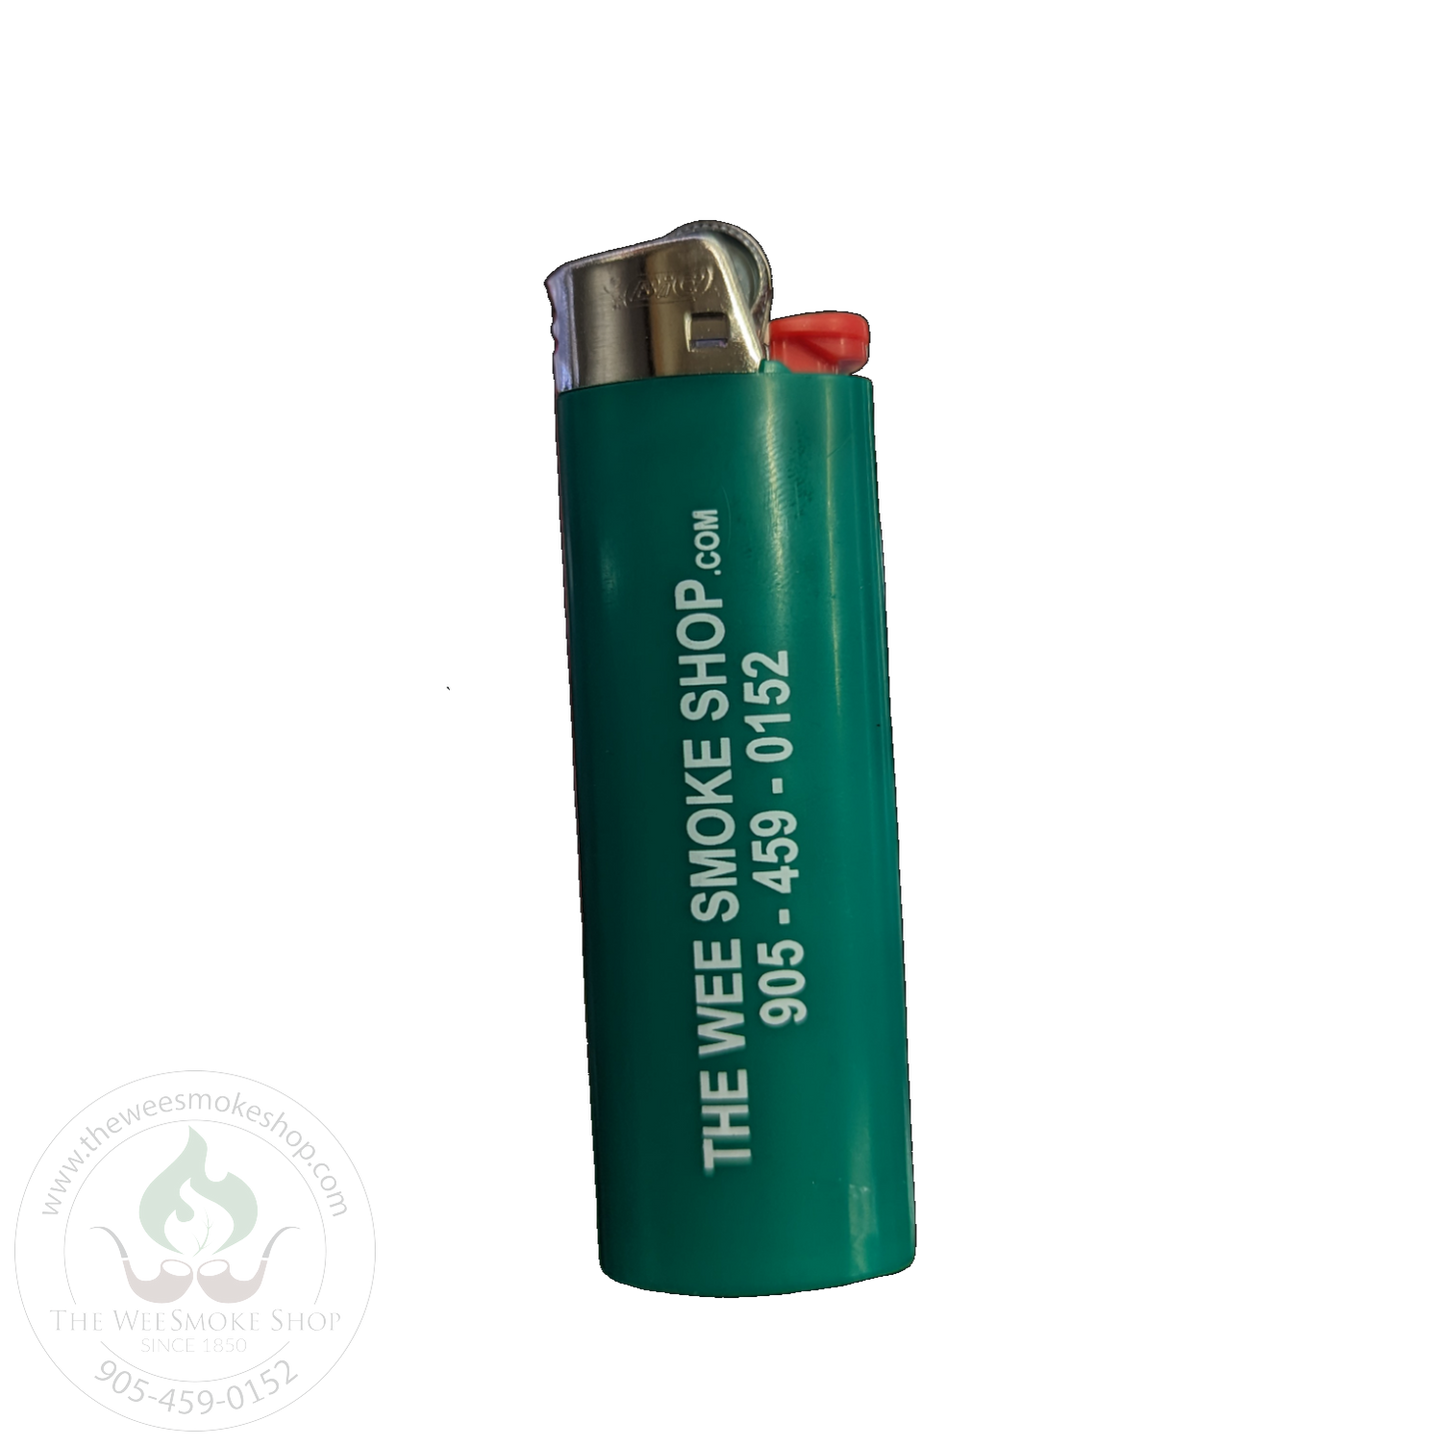 Green Bic Lighter with company name and number - Wee Smoke Shop